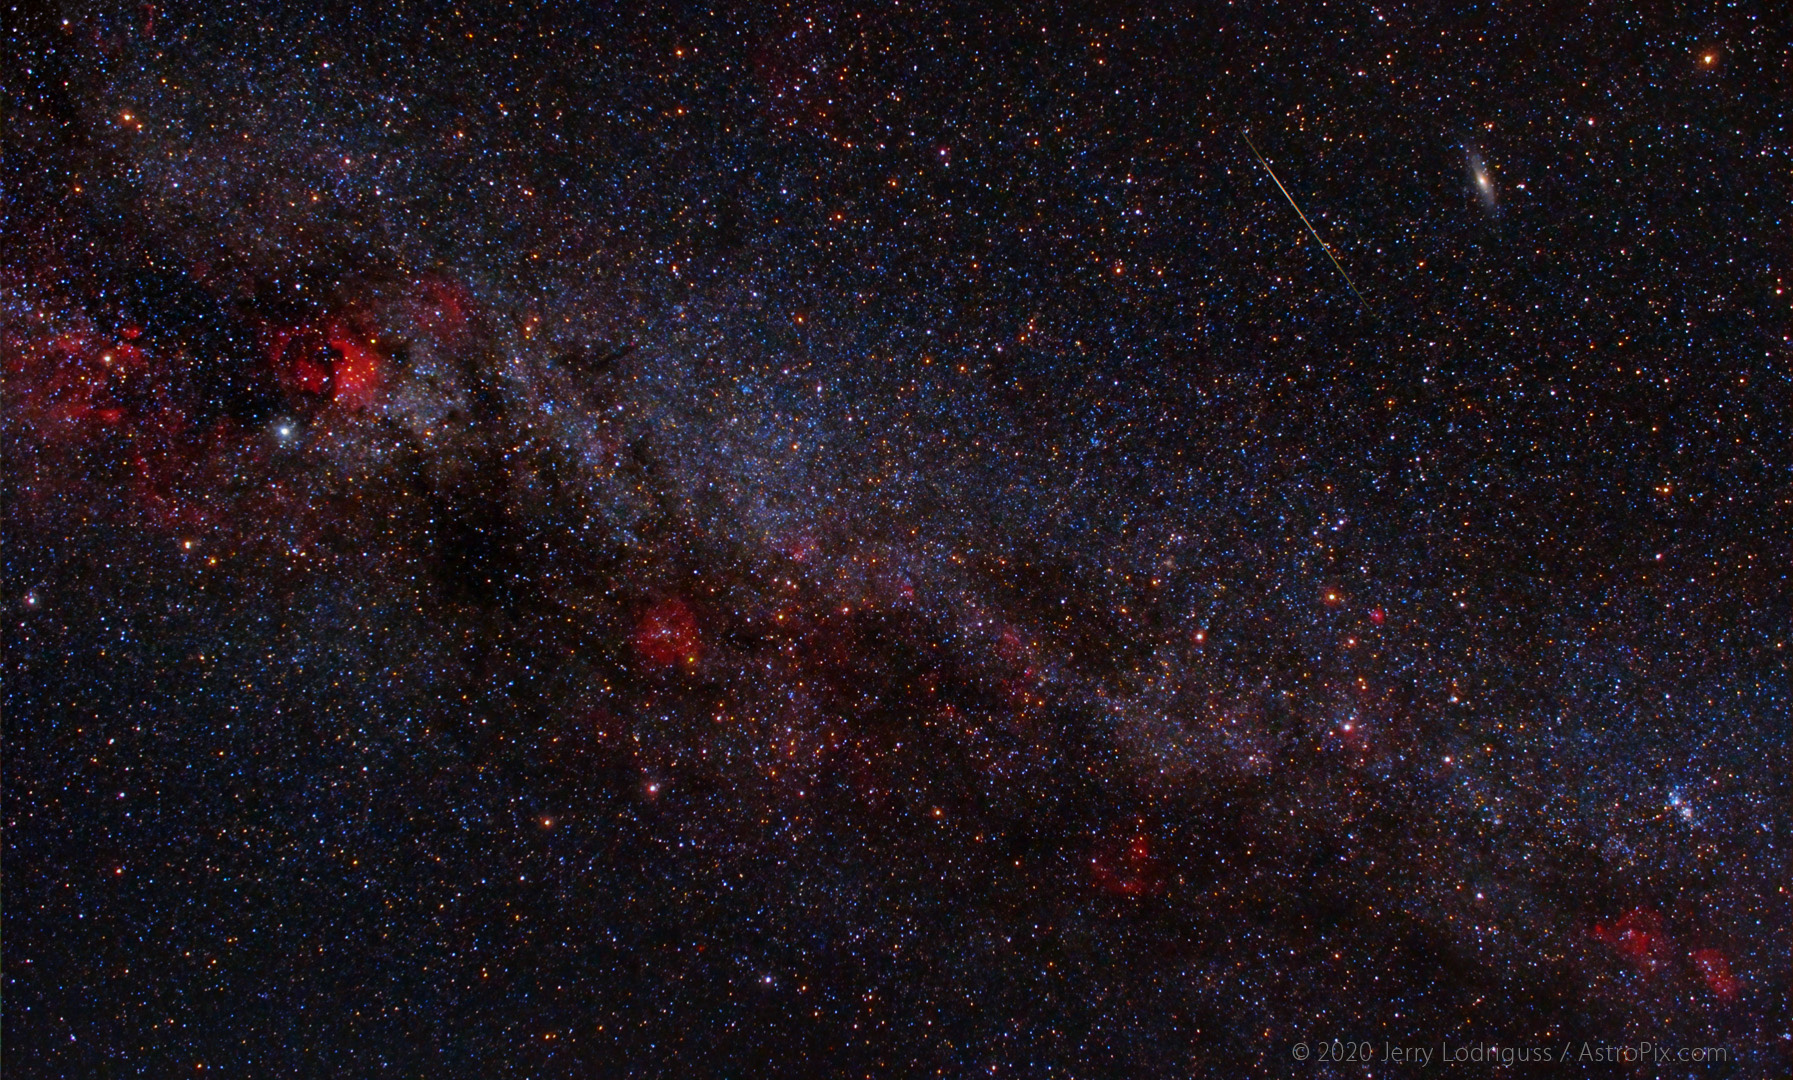 The Northern Milky Way from Cygnus to Cassiopeia.